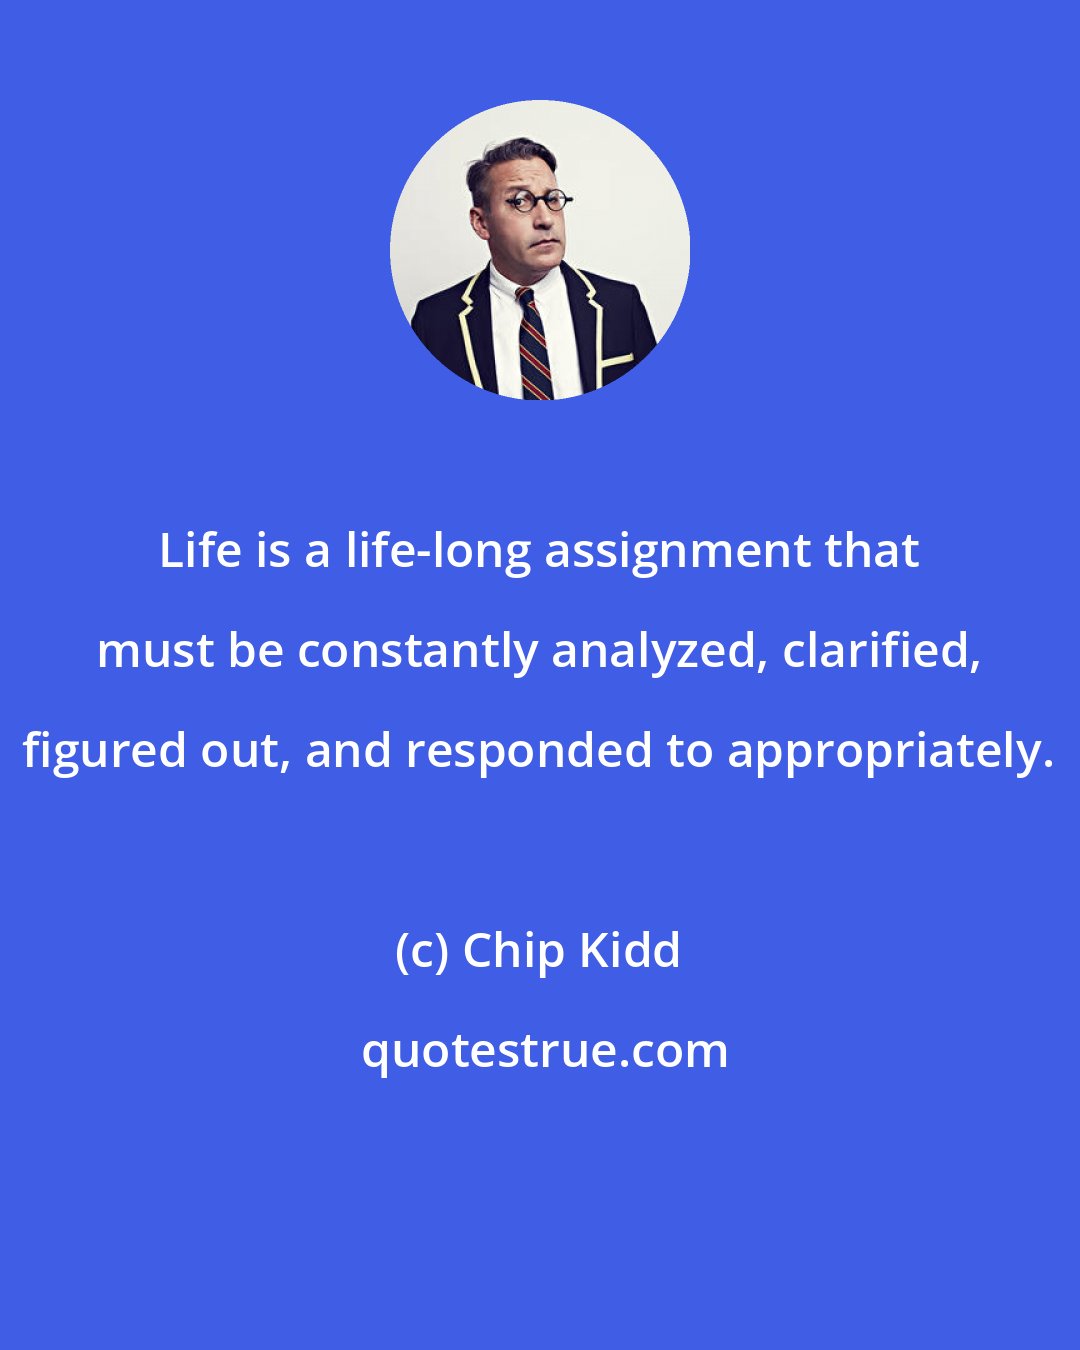 Chip Kidd: Life is a life-long assignment that must be constantly analyzed, clarified, figured out, and responded to appropriately.